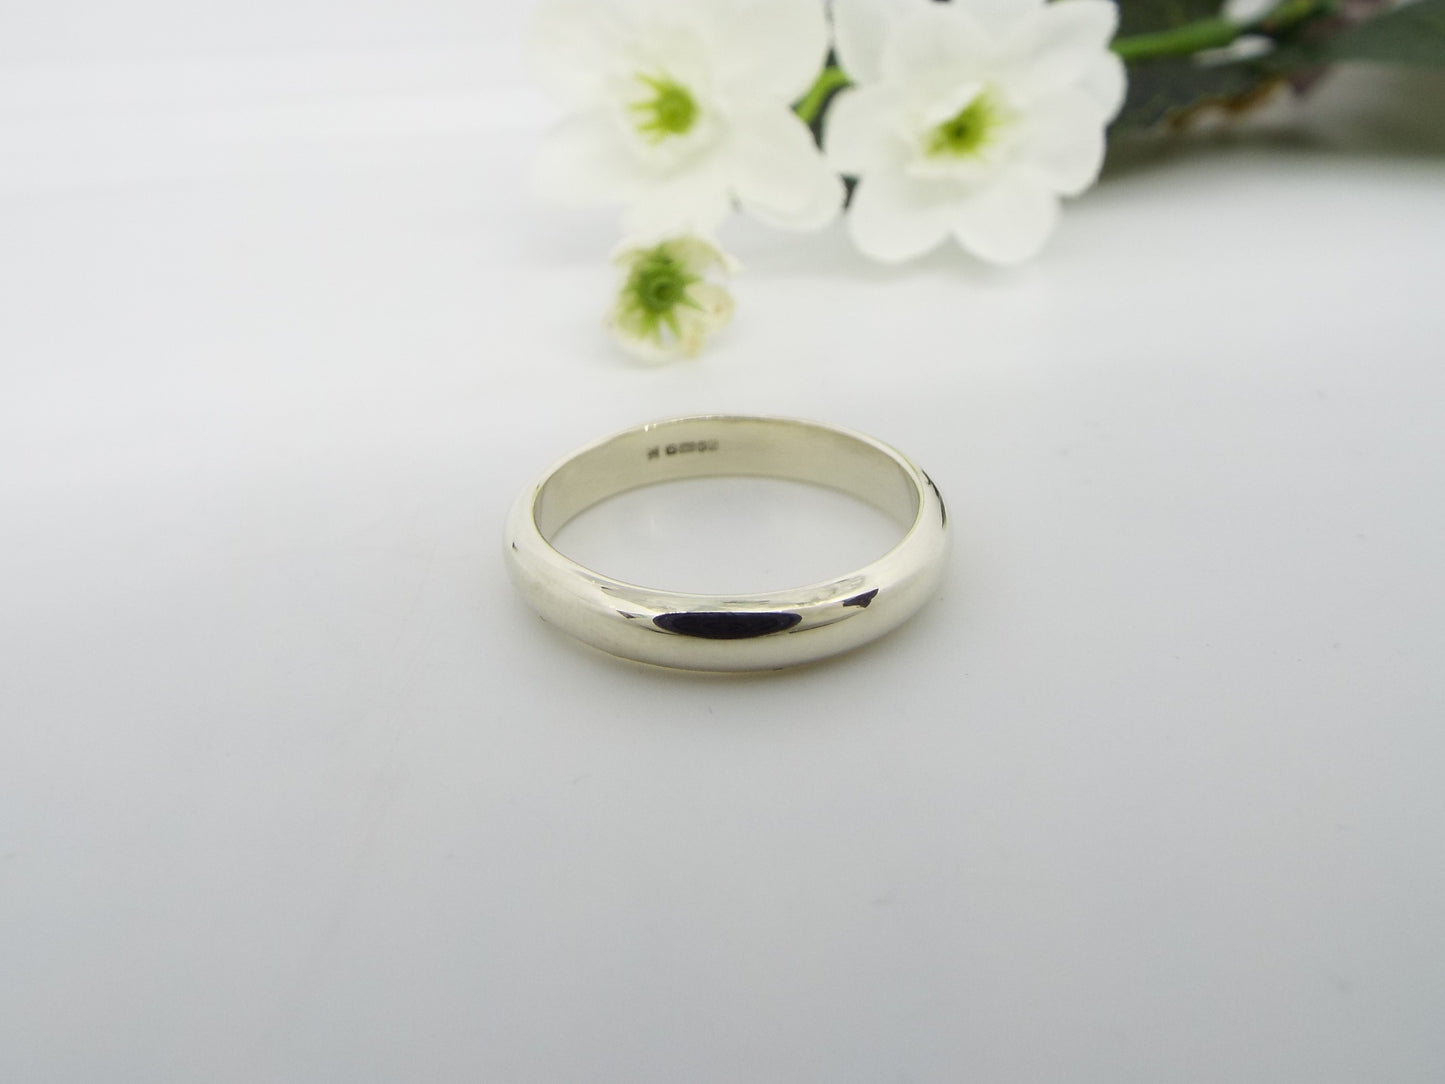 9ct White Gold Wedding Ring - Smooth polished - 4mm wide